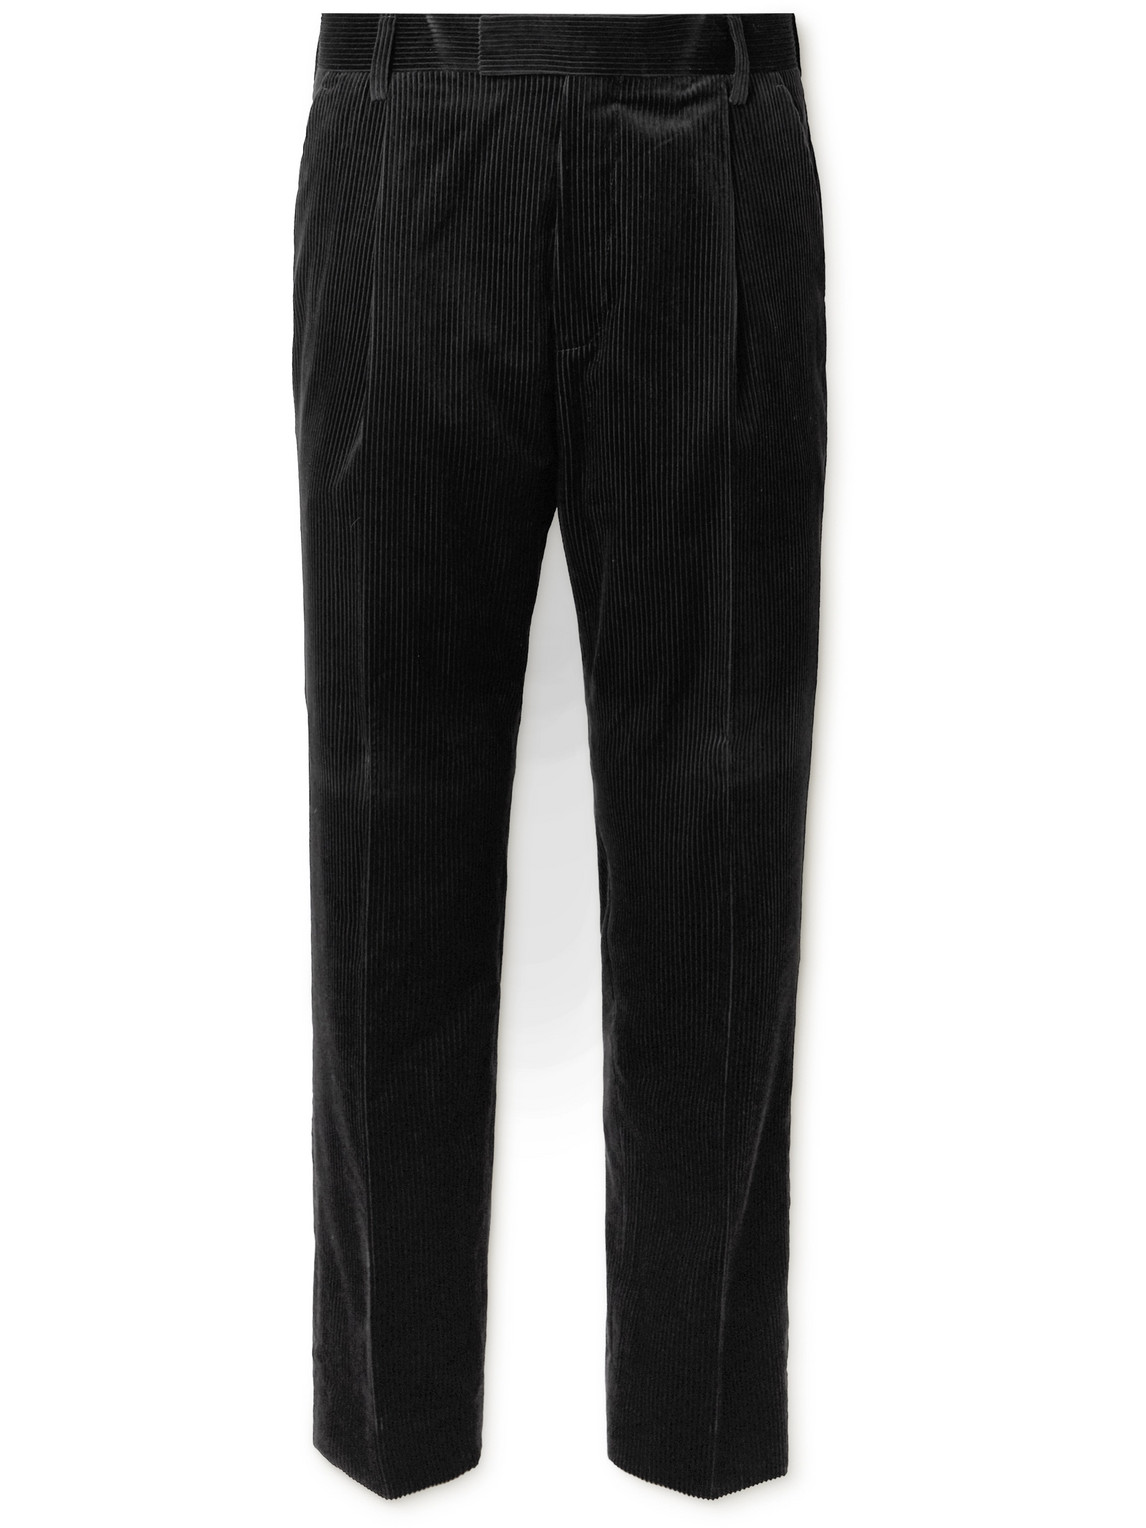 Mr P. - Tapered Pleated Cotton and Cashmere-Blend Corduroy Trousers - Men - Black - 28 von Mr P.